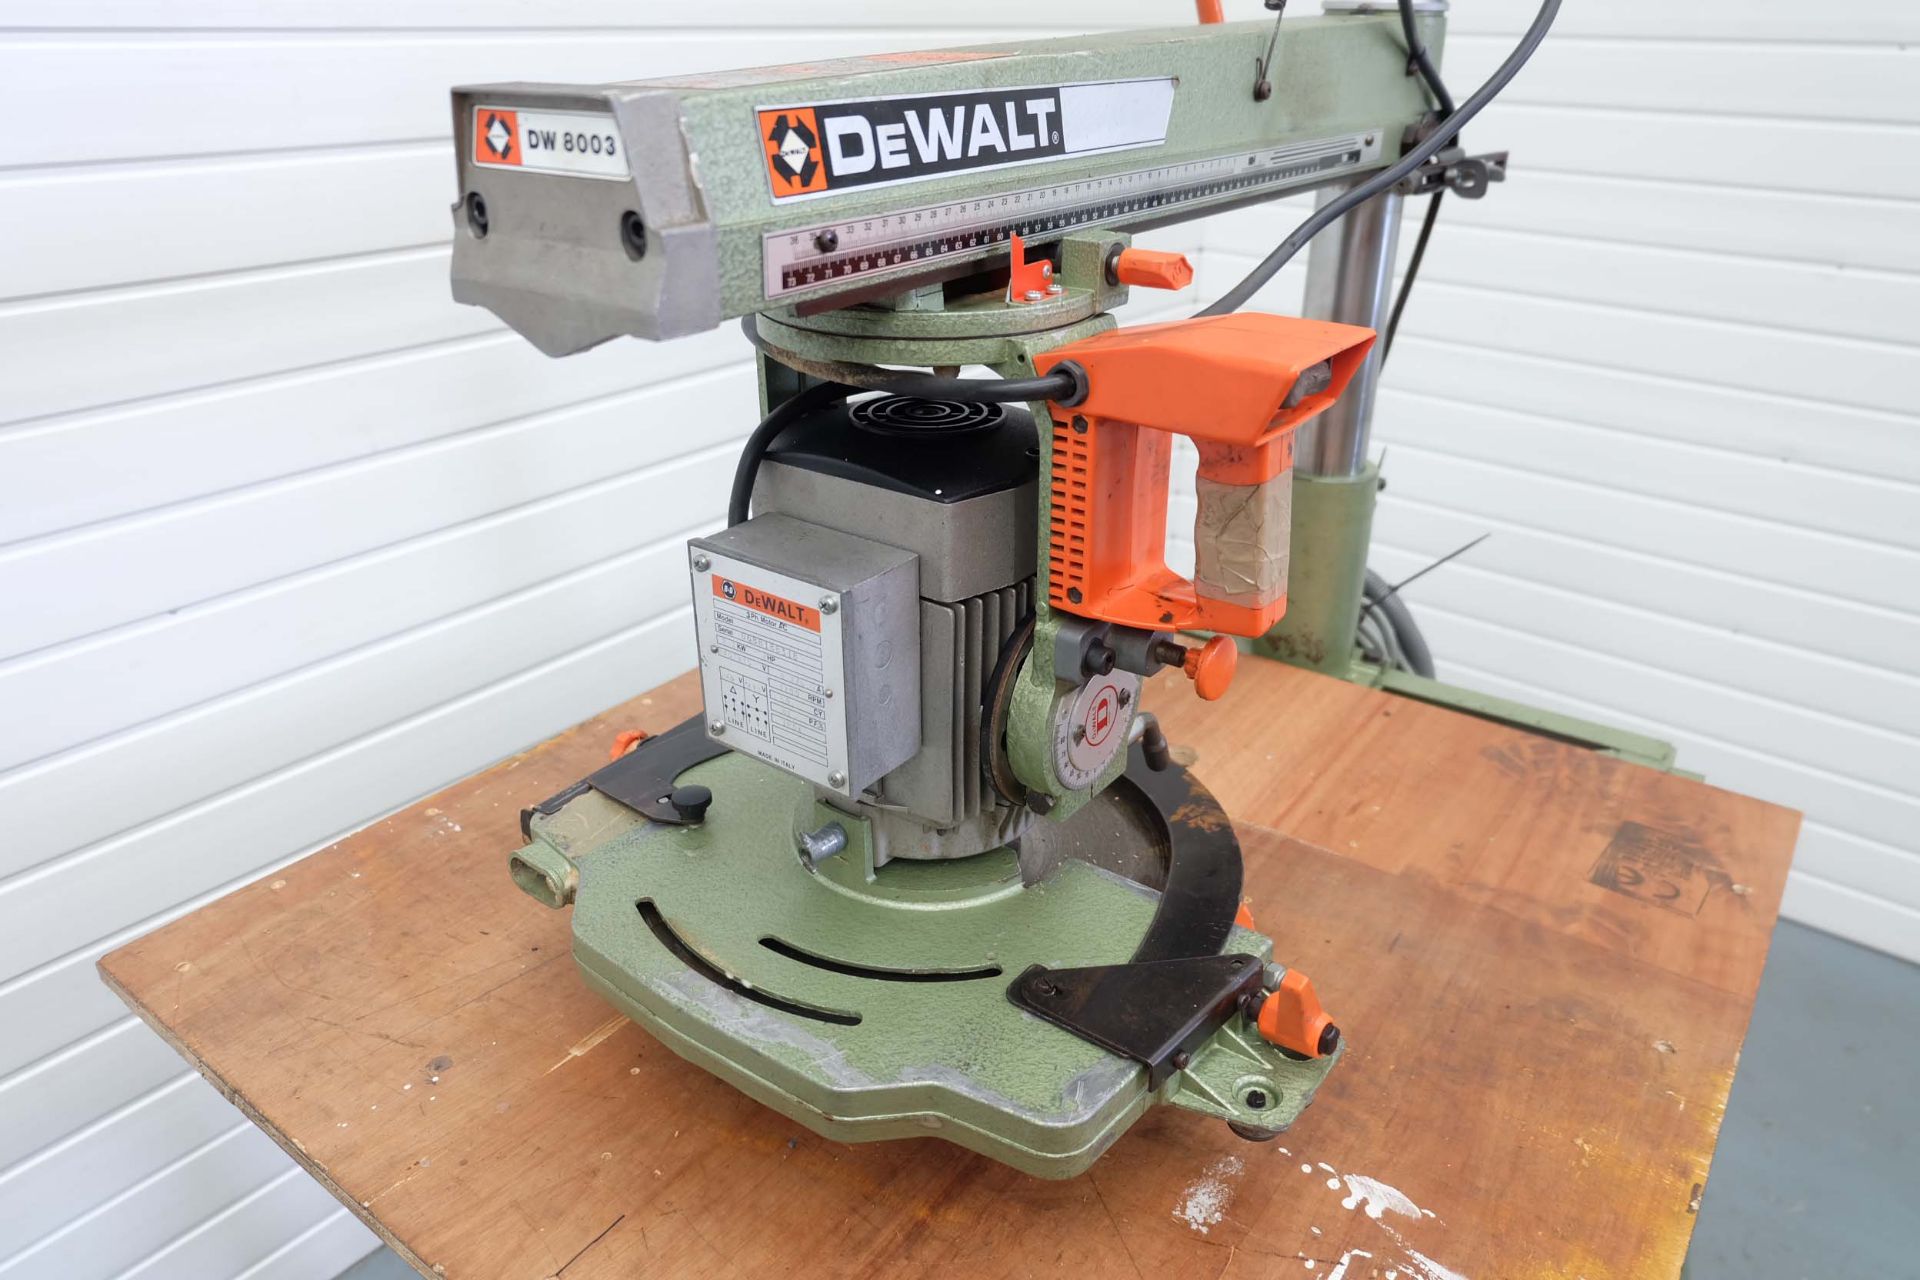 DeWalt Model DW8003 Radial Arm Saw. Motor 3 Phase, 2.2kW, 3Hp. Made in Italy - Image 6 of 8